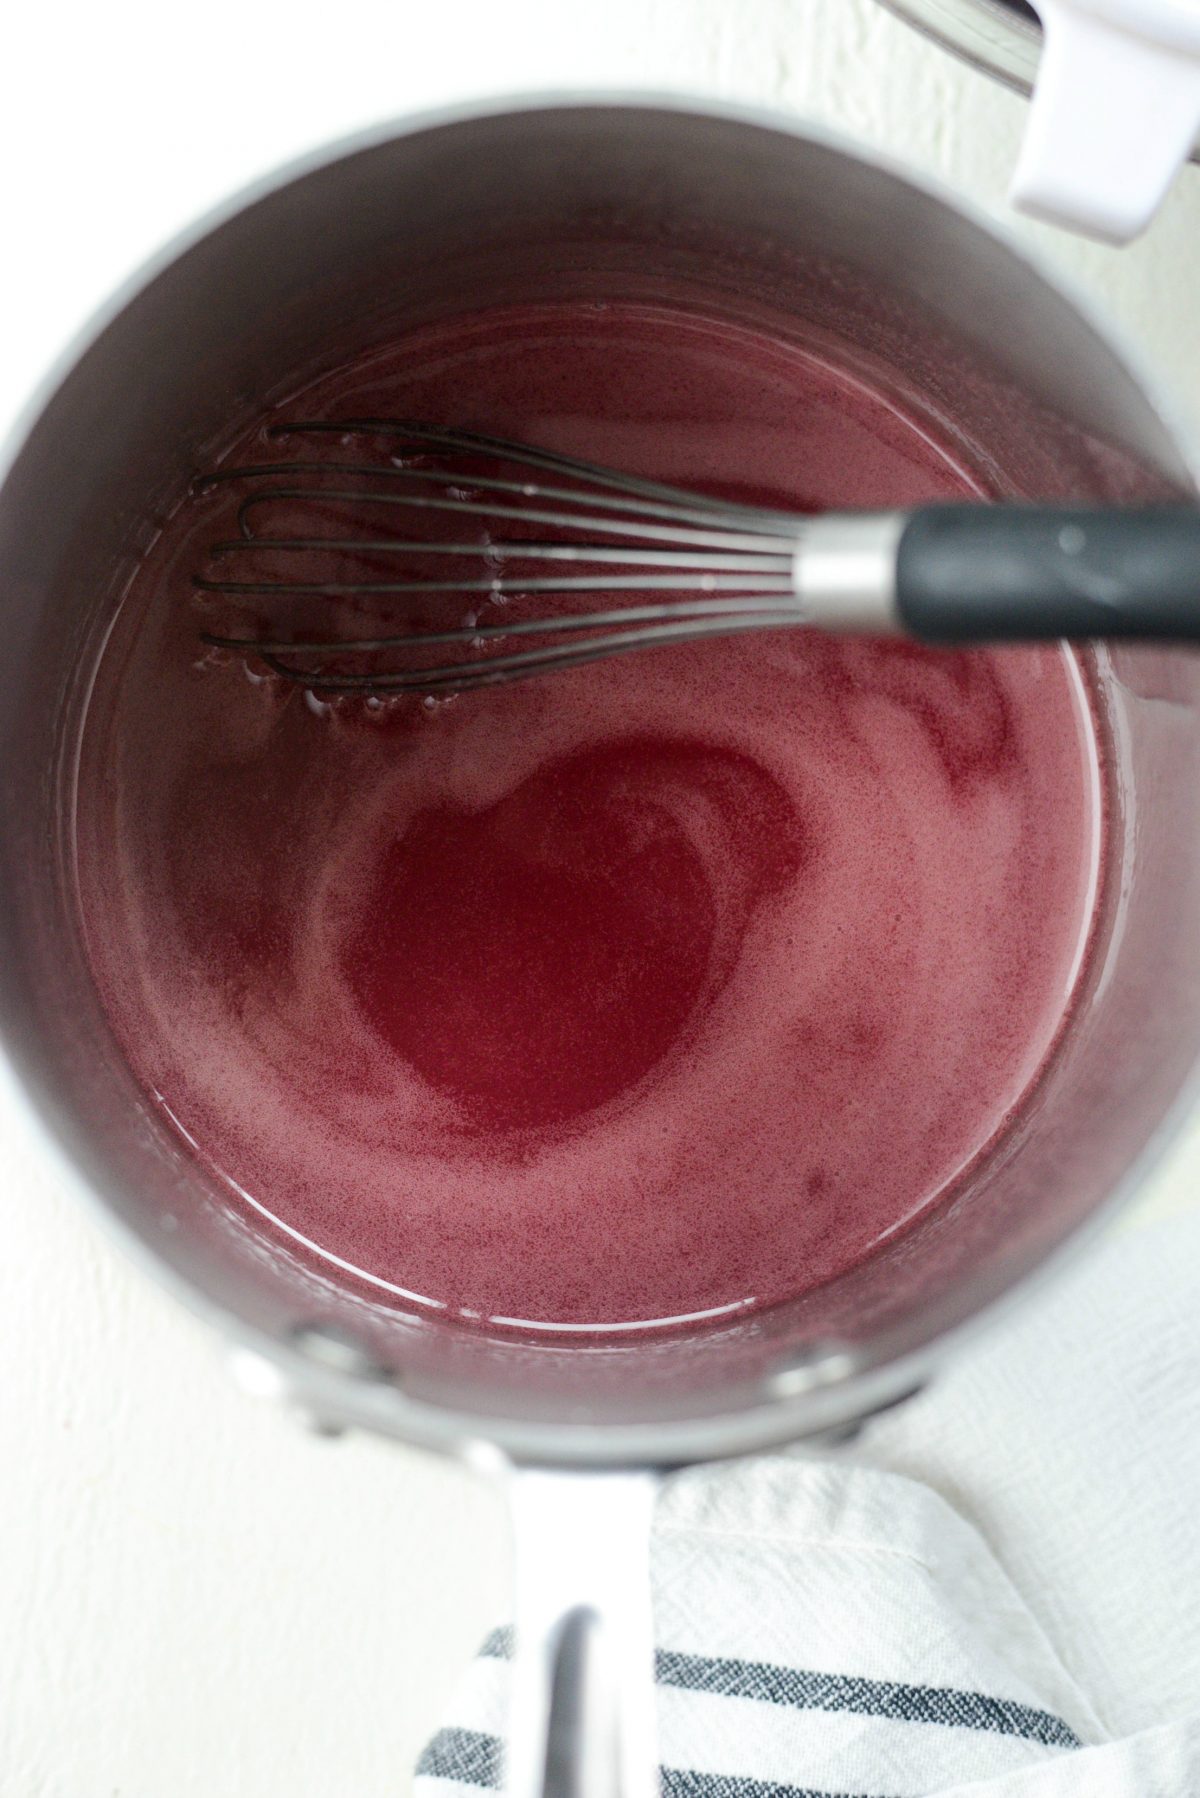 whisking until thickened